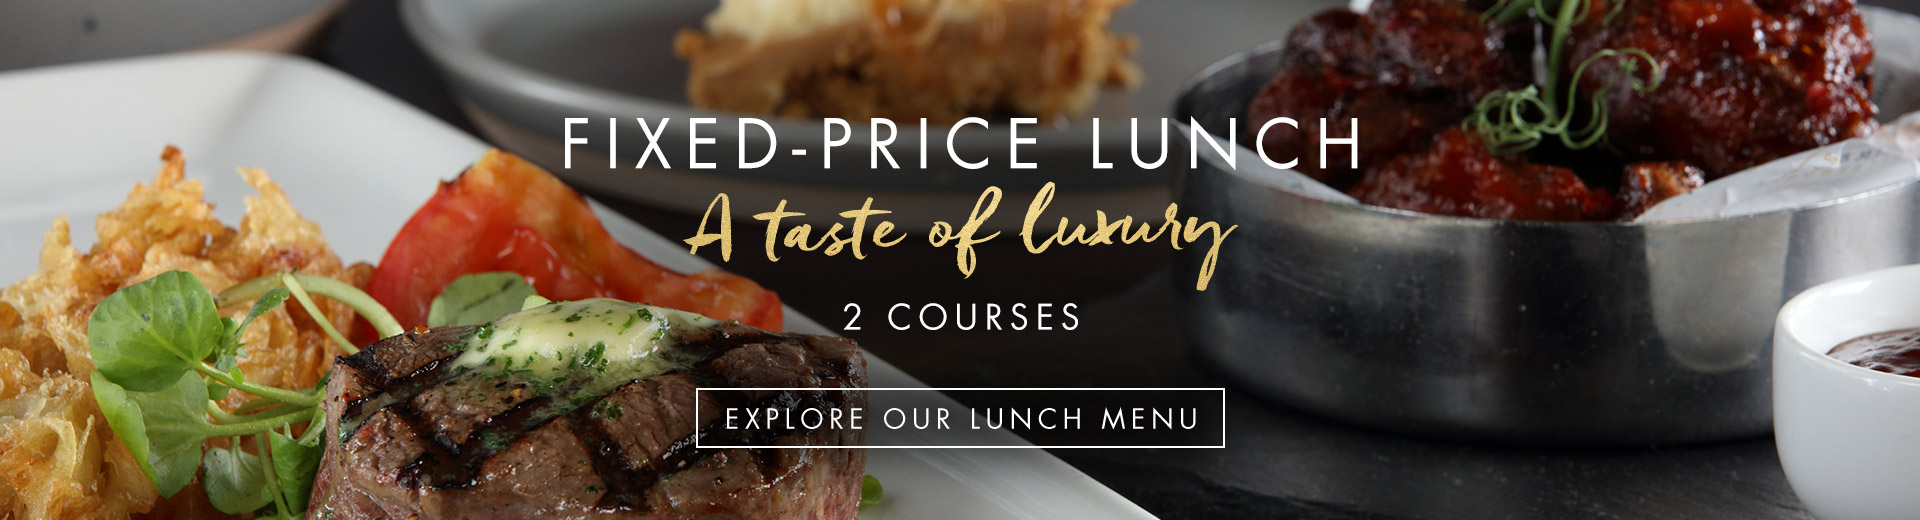 Fixed Price Lunch Menu